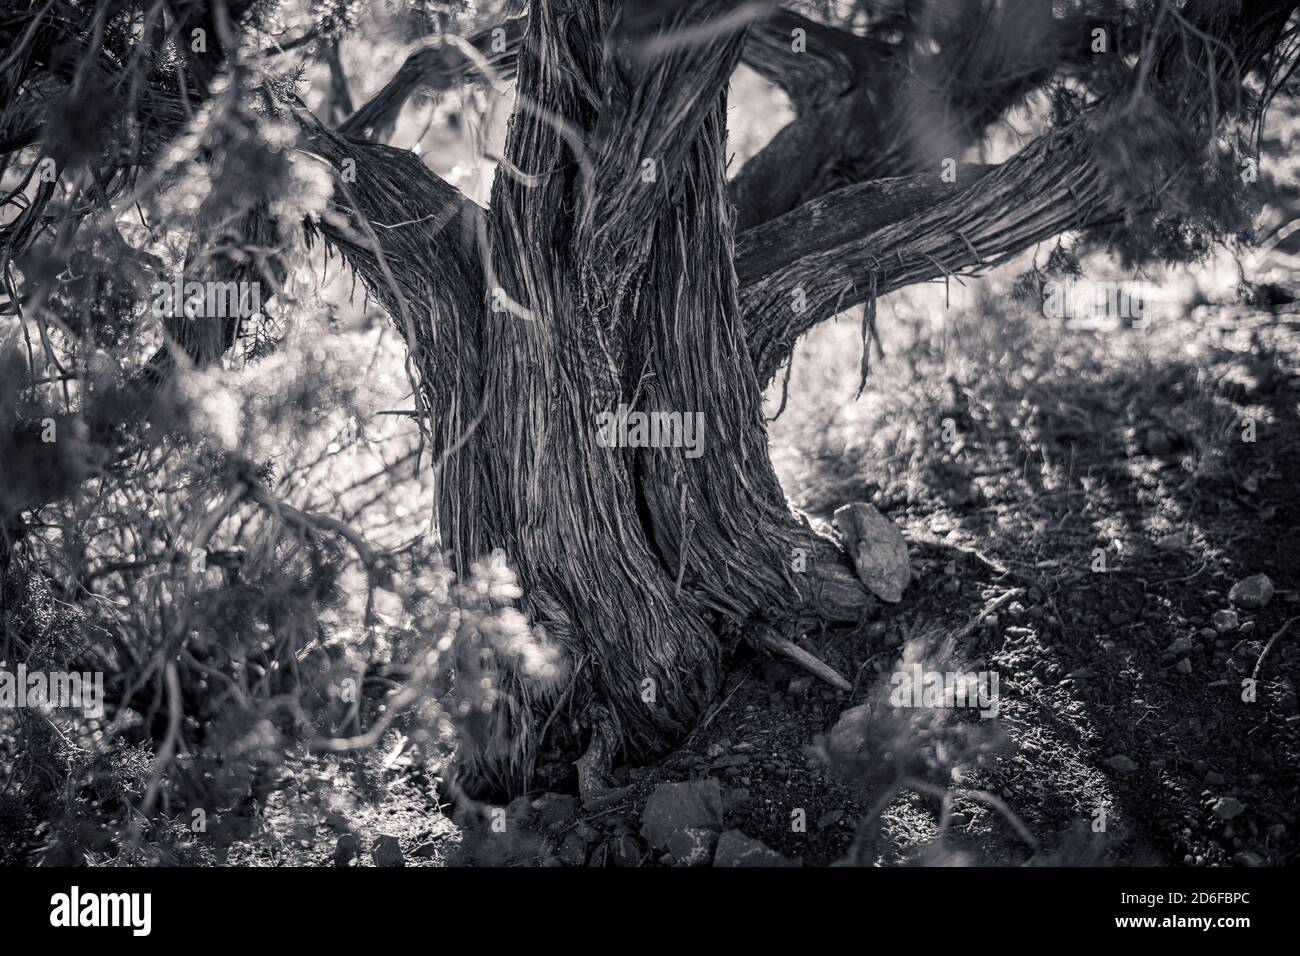 Gnarled trunk of a bristlecone pine tree in black and white Stock Photo